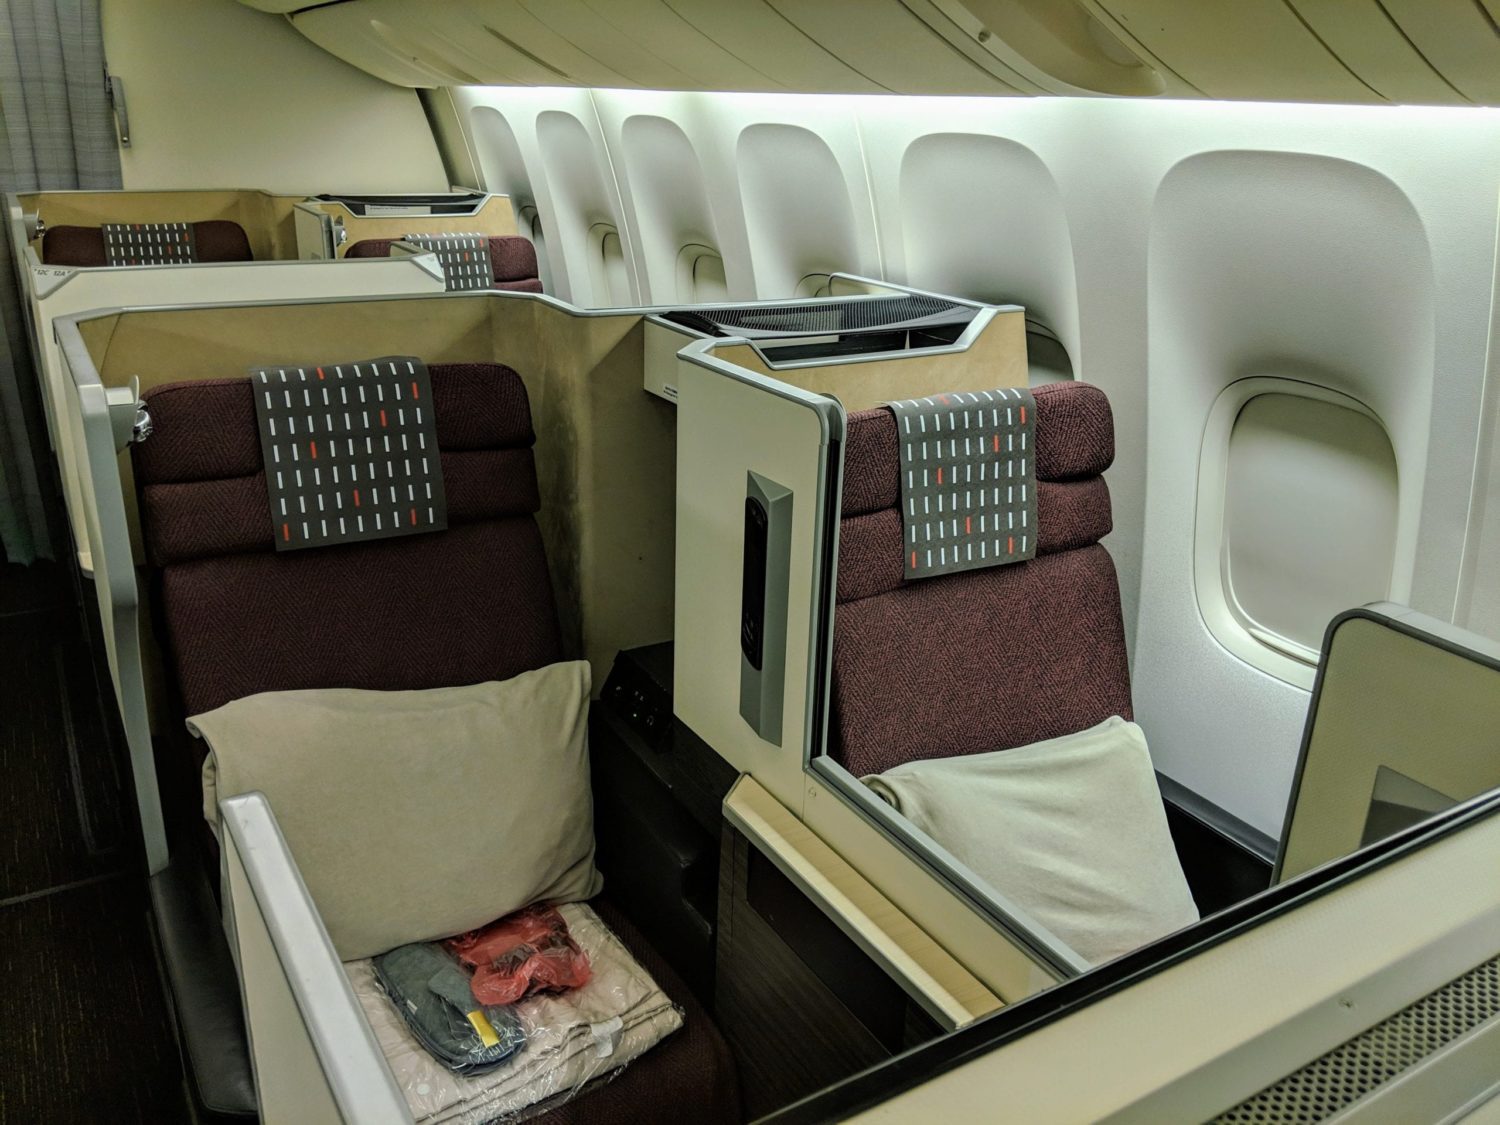 Japan Airlines Business Class seats